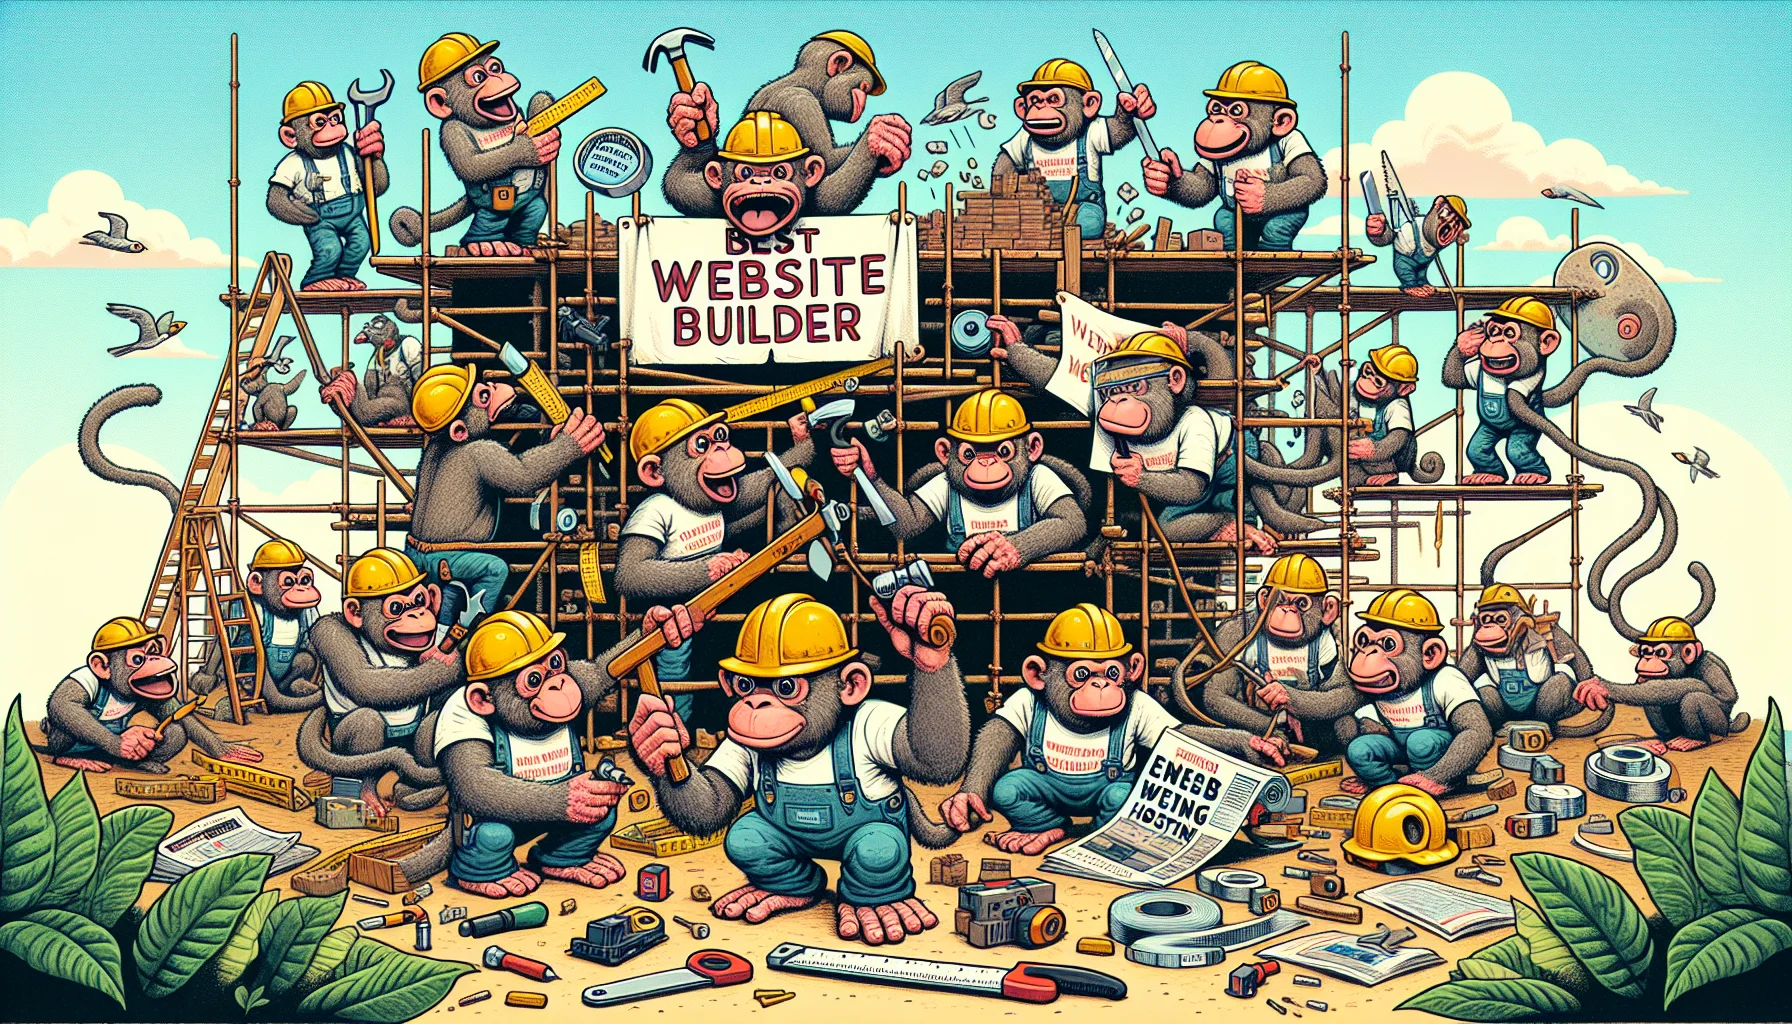 Create a humorous image that depicts a scene related to website building. Main elements of the image include a variety of anthropomorphic cartoon monkeys, akin to the ones in comic strips, putting together a website with old-fashioned construction tools like hammers, saws, and tapes. They wear hardhats and humorous expressions of concentration and effort. One monkey is holding up a big sign that reads 'Best Website Builder'. Another monkey is unfolding a big banner that says 'Enticing Web Hosting'. The whole scene gives the impression of a mock construction site. Include characters and elements frequently associated with tech culture and web development.